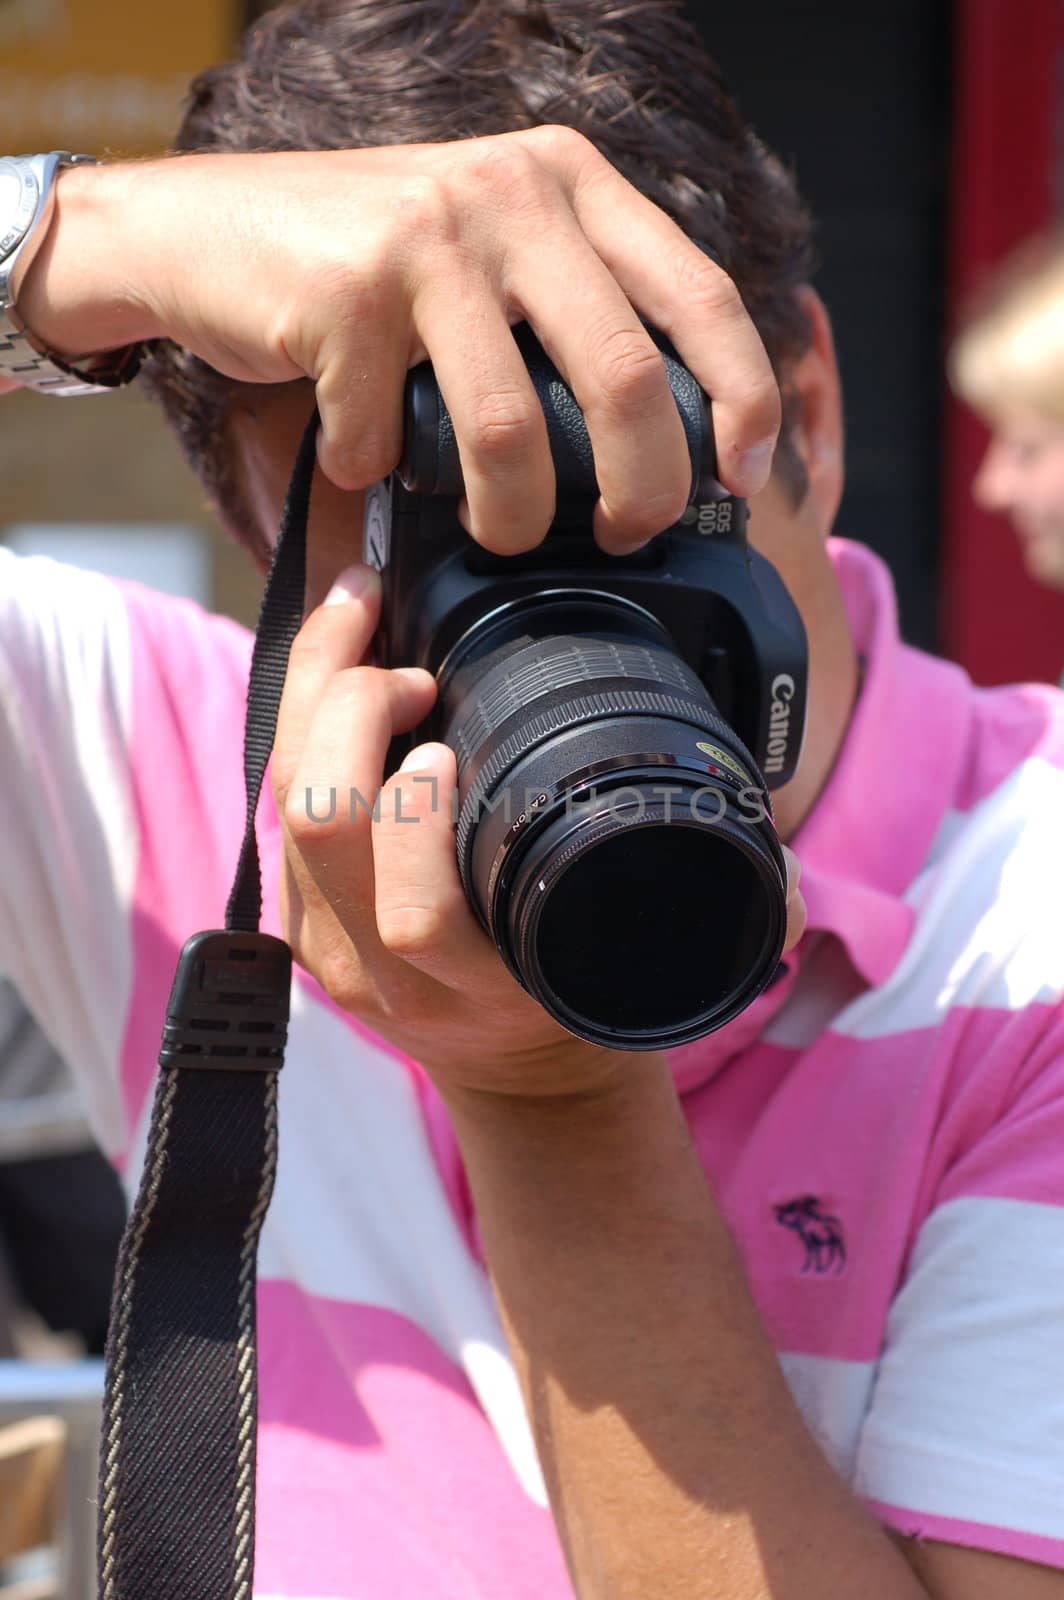 Male photographer holding camera up to eye to take a shot.